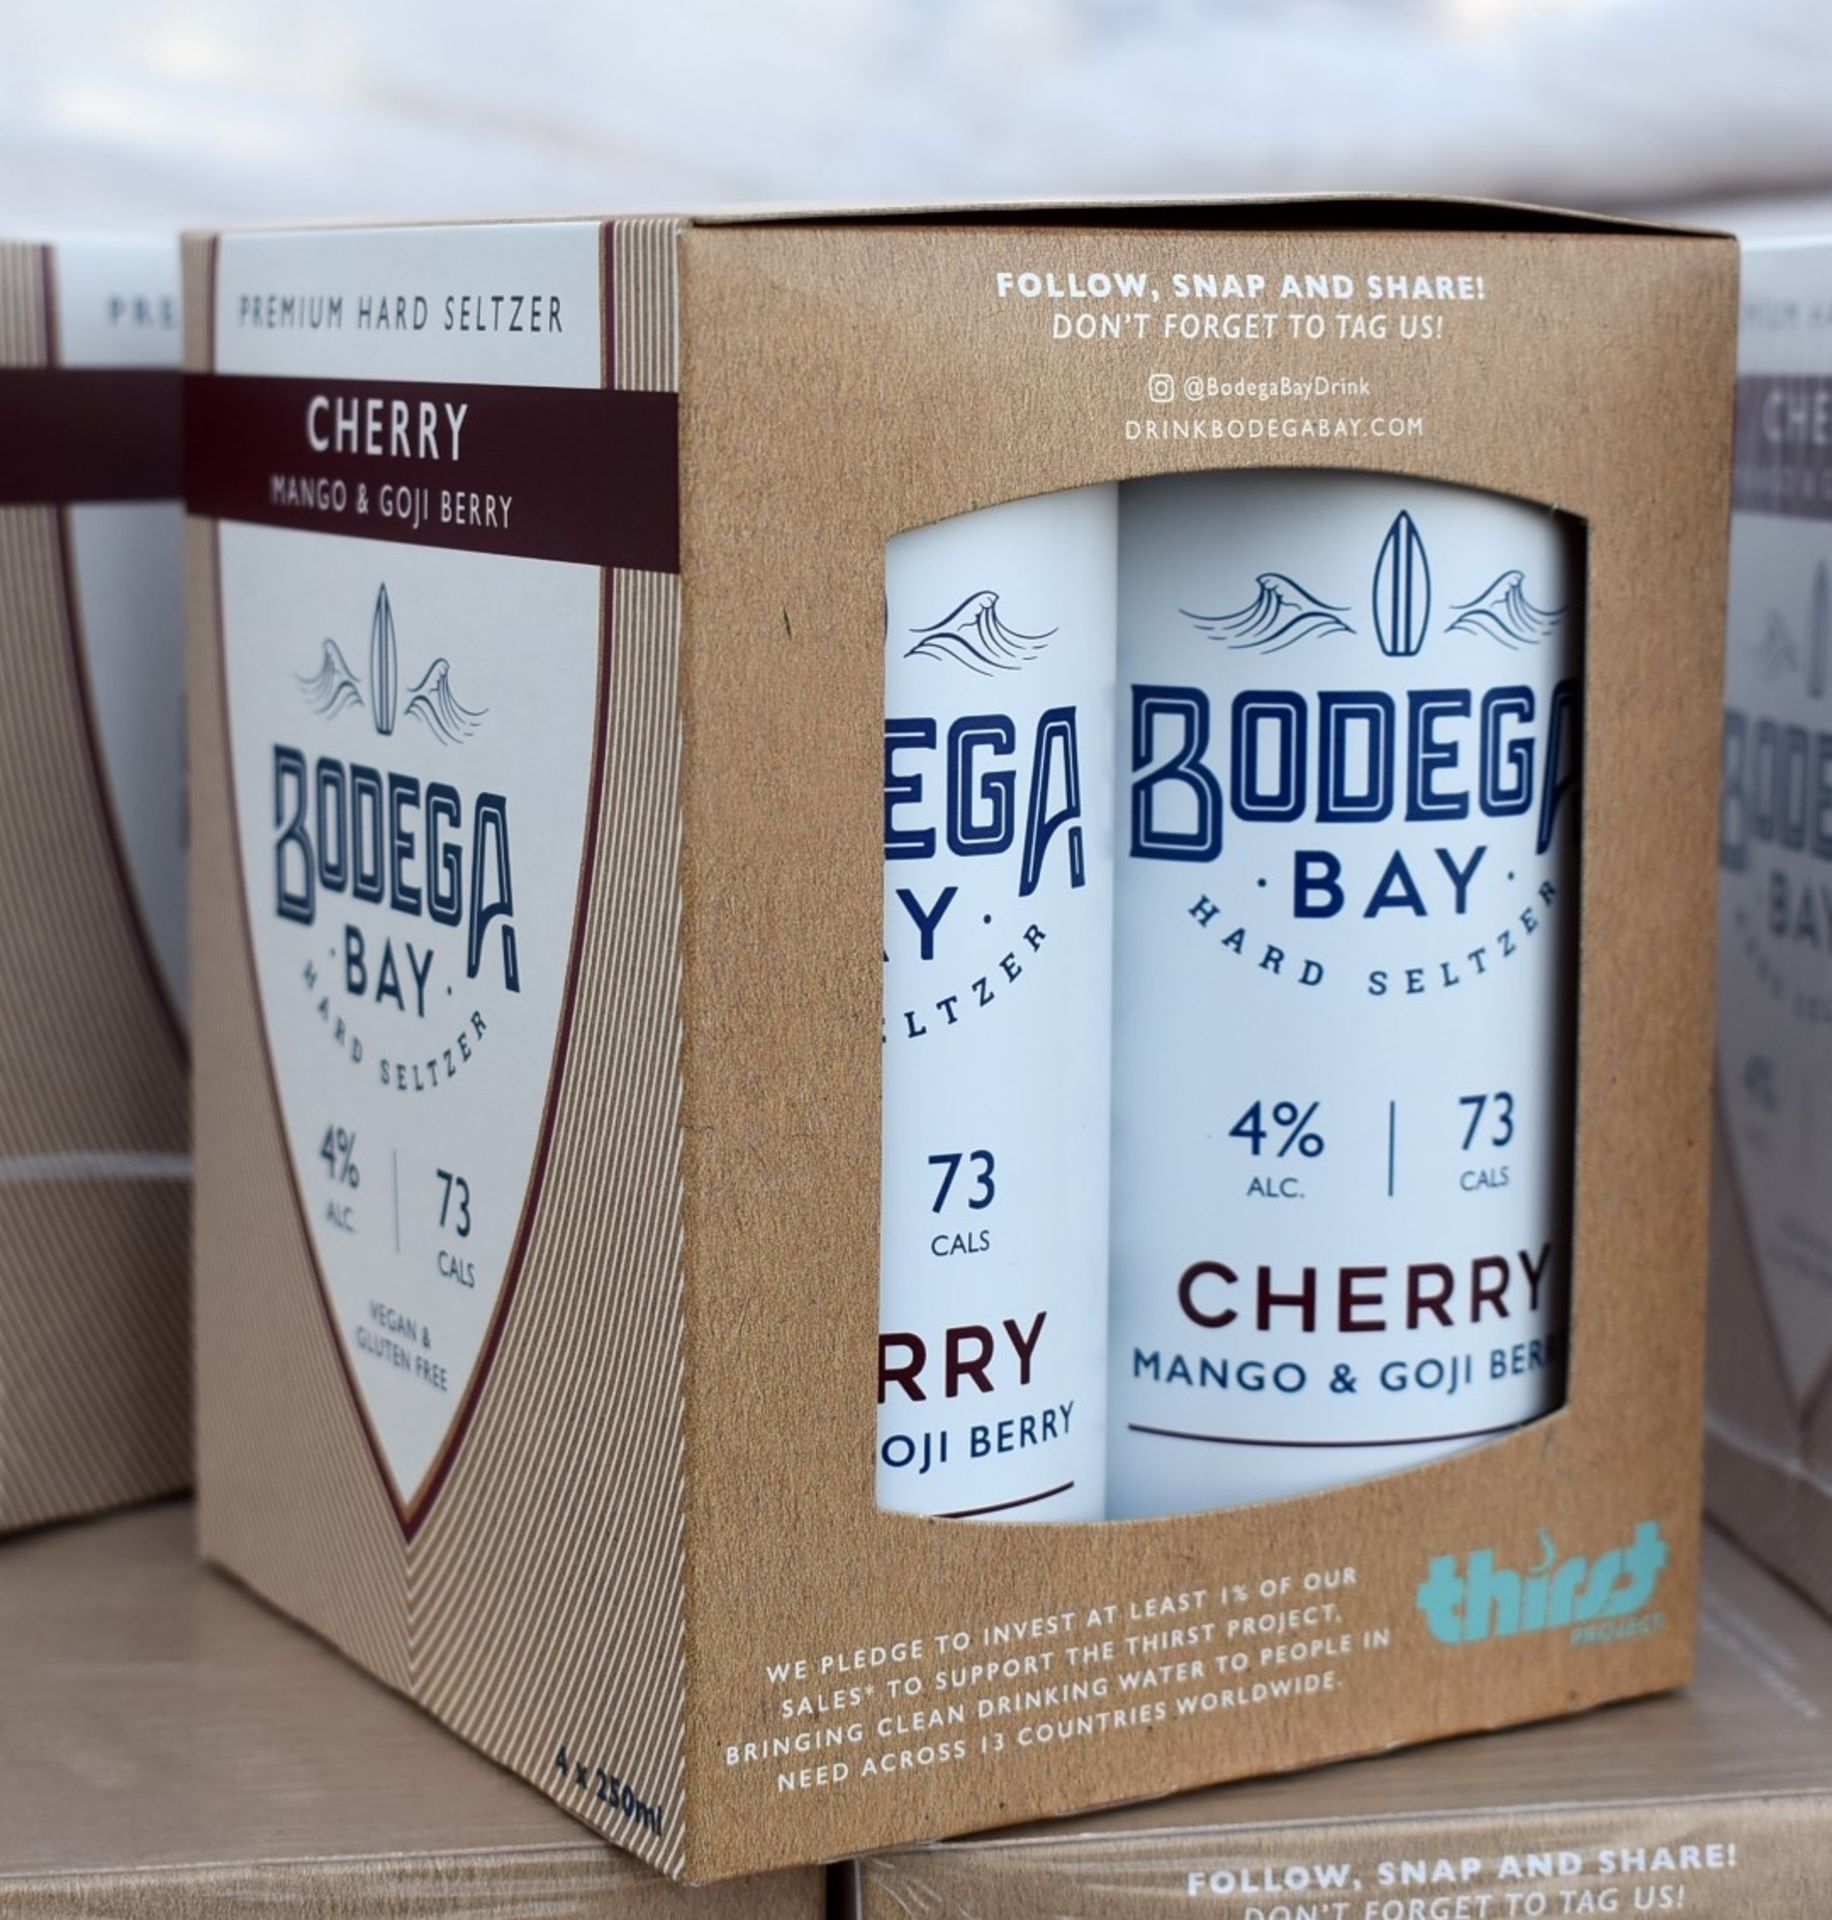 360 x Cans of Bodega Bay Hard Seltzer 250ml Alcoholic Sparkling Water Drinks - Various Flavours - Image 14 of 15